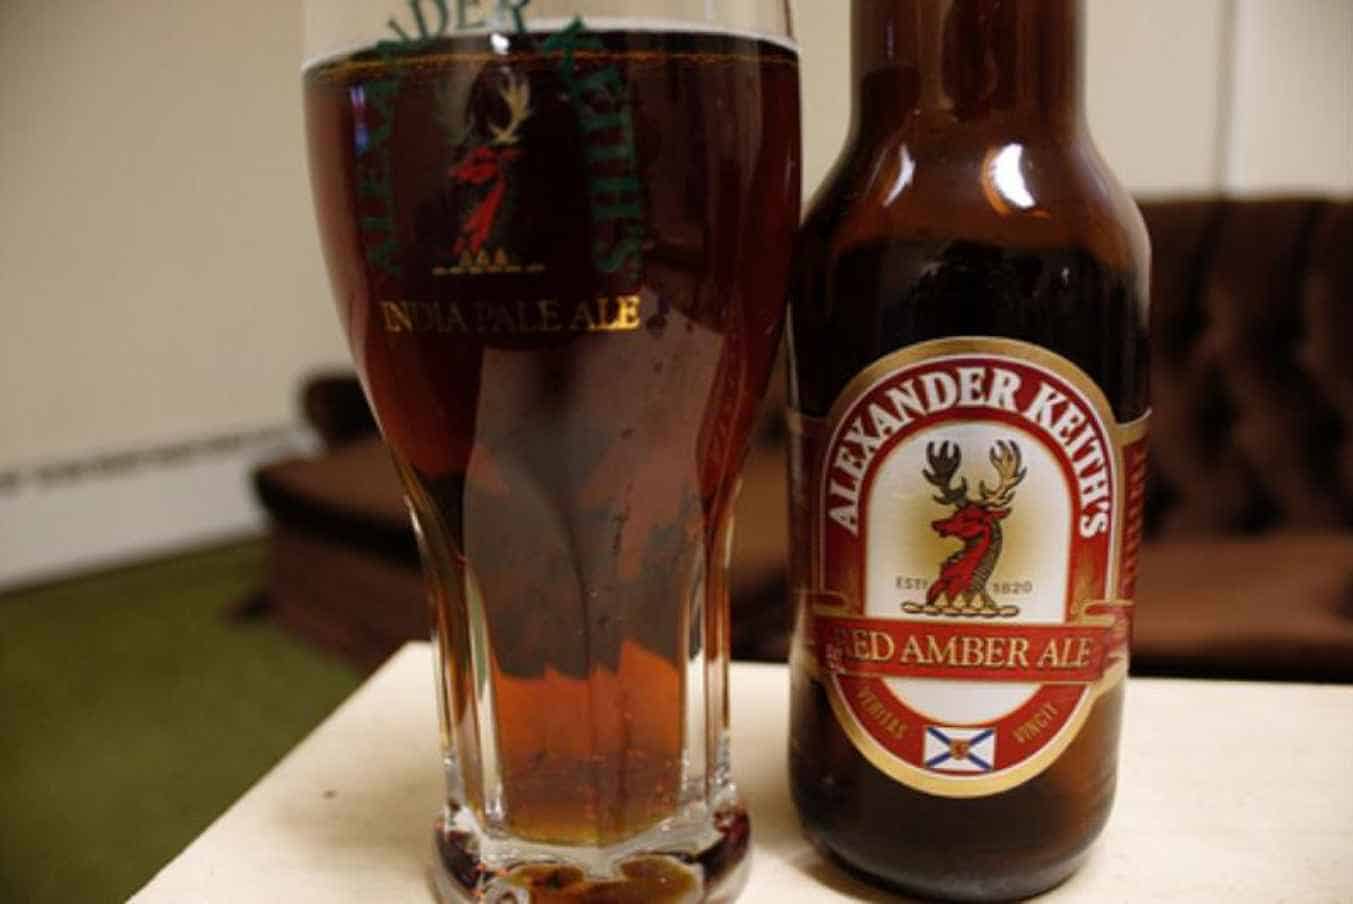 Alexander Keith's Red Amber Ale by Alexander Keith